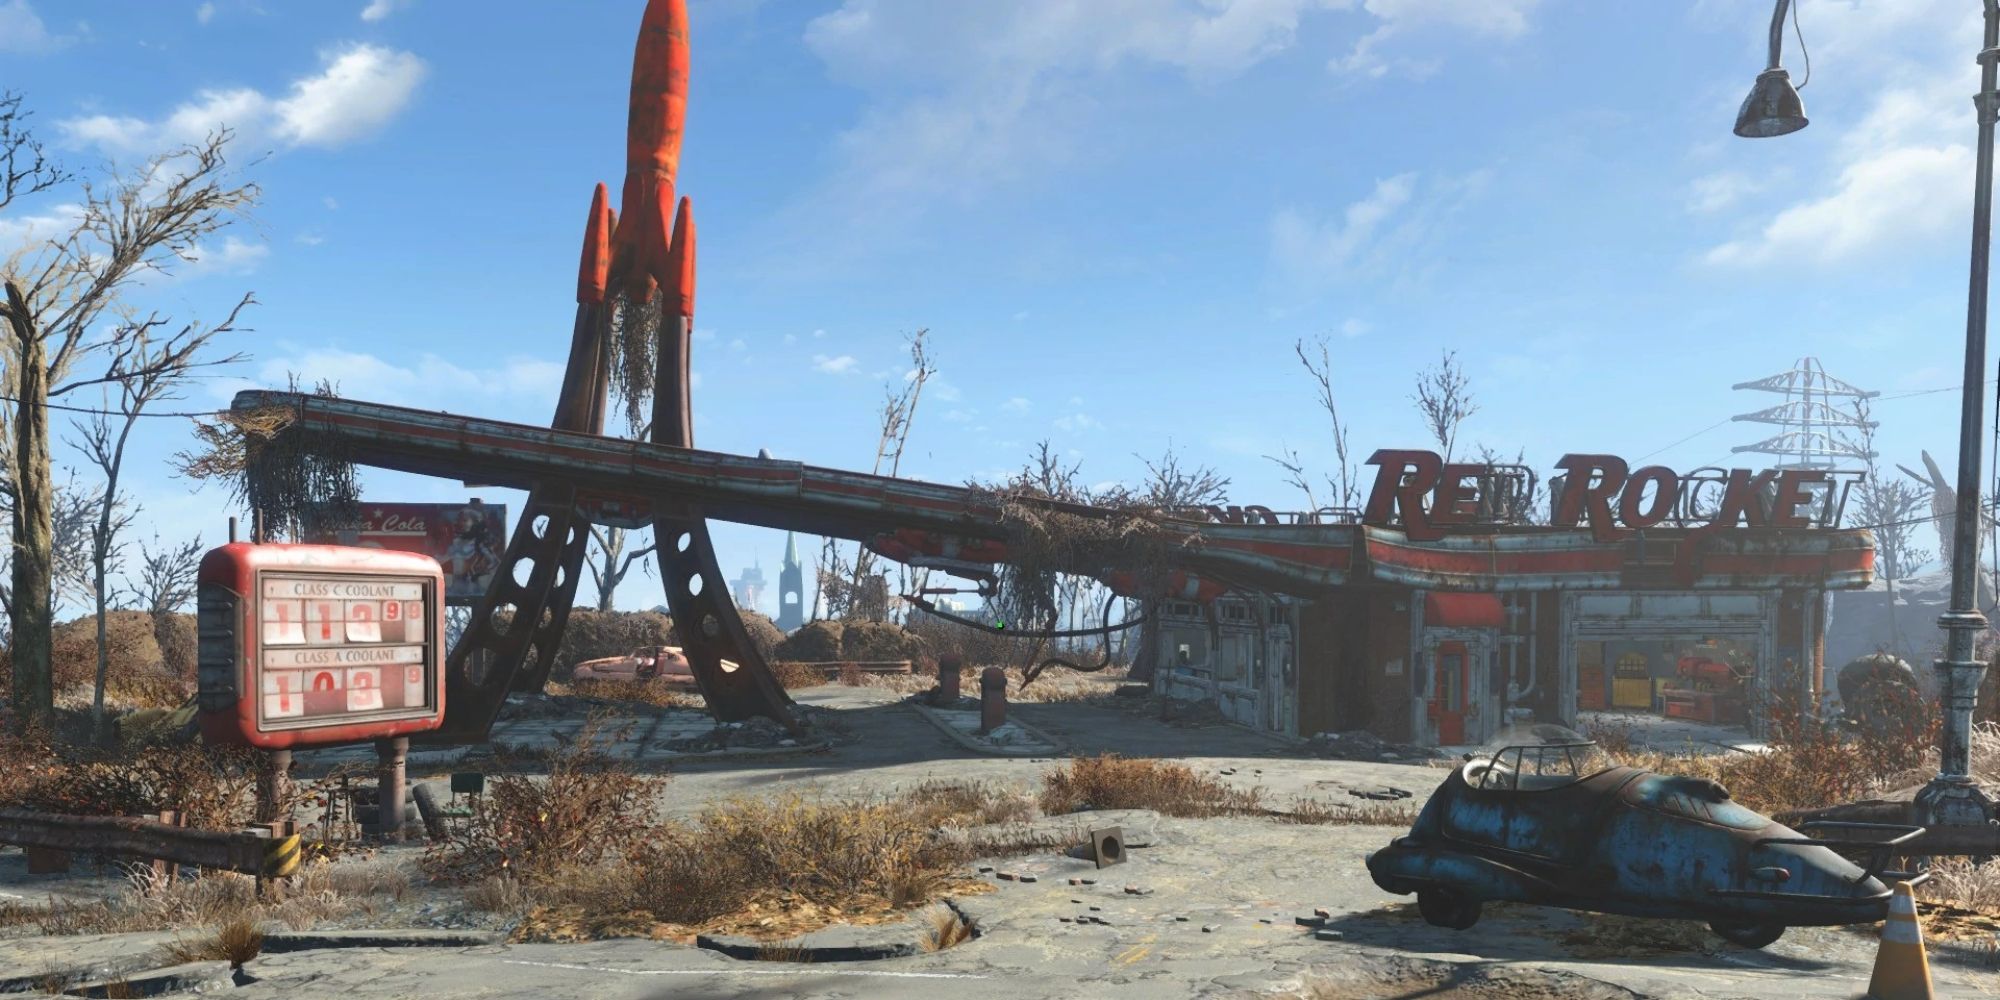 Fallout 4 Red Rocket Truck Stop